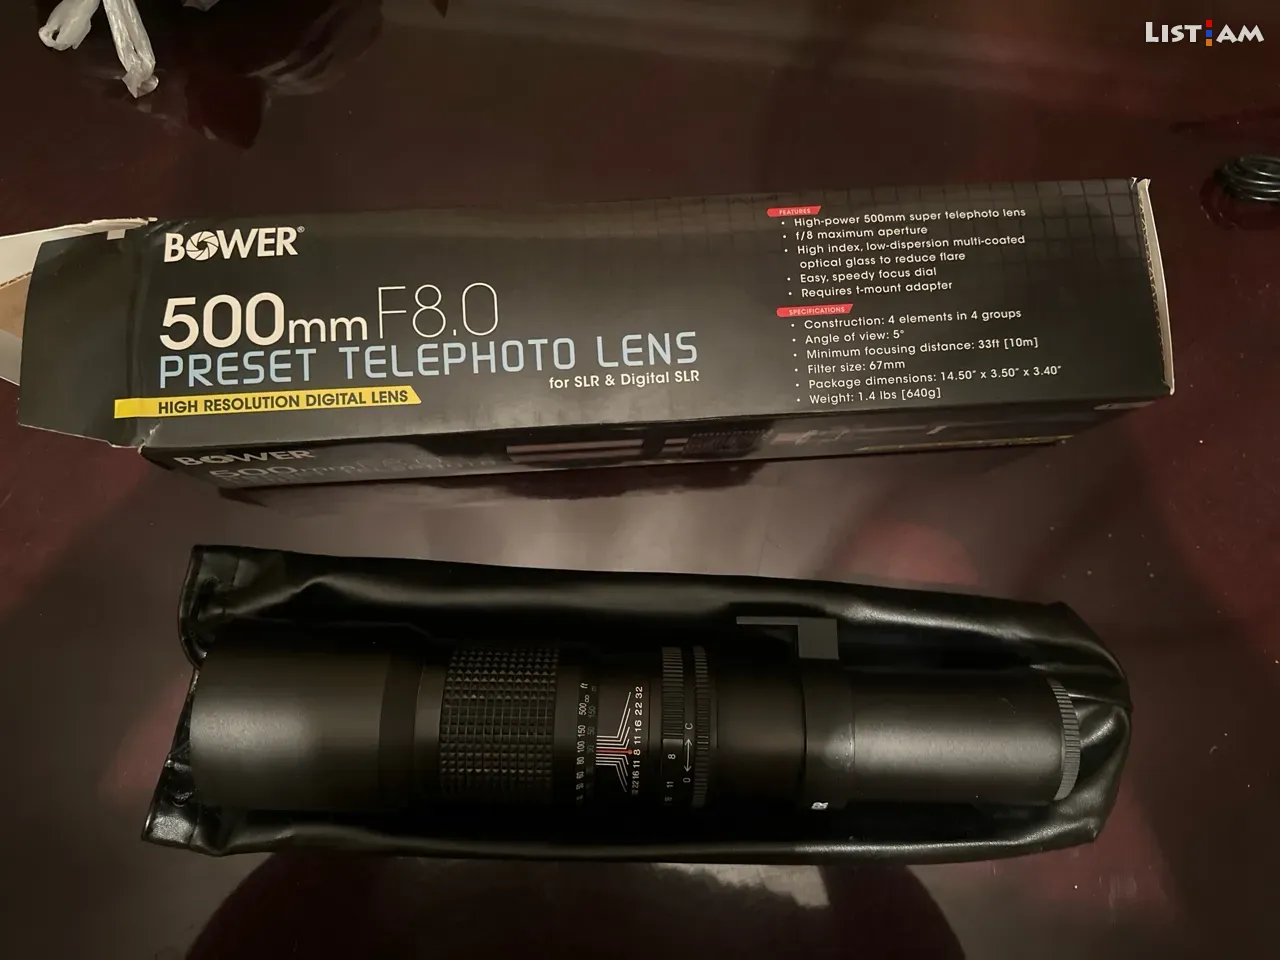 Bower preset telephoto lens 500mm F8.0 - Photo and Video